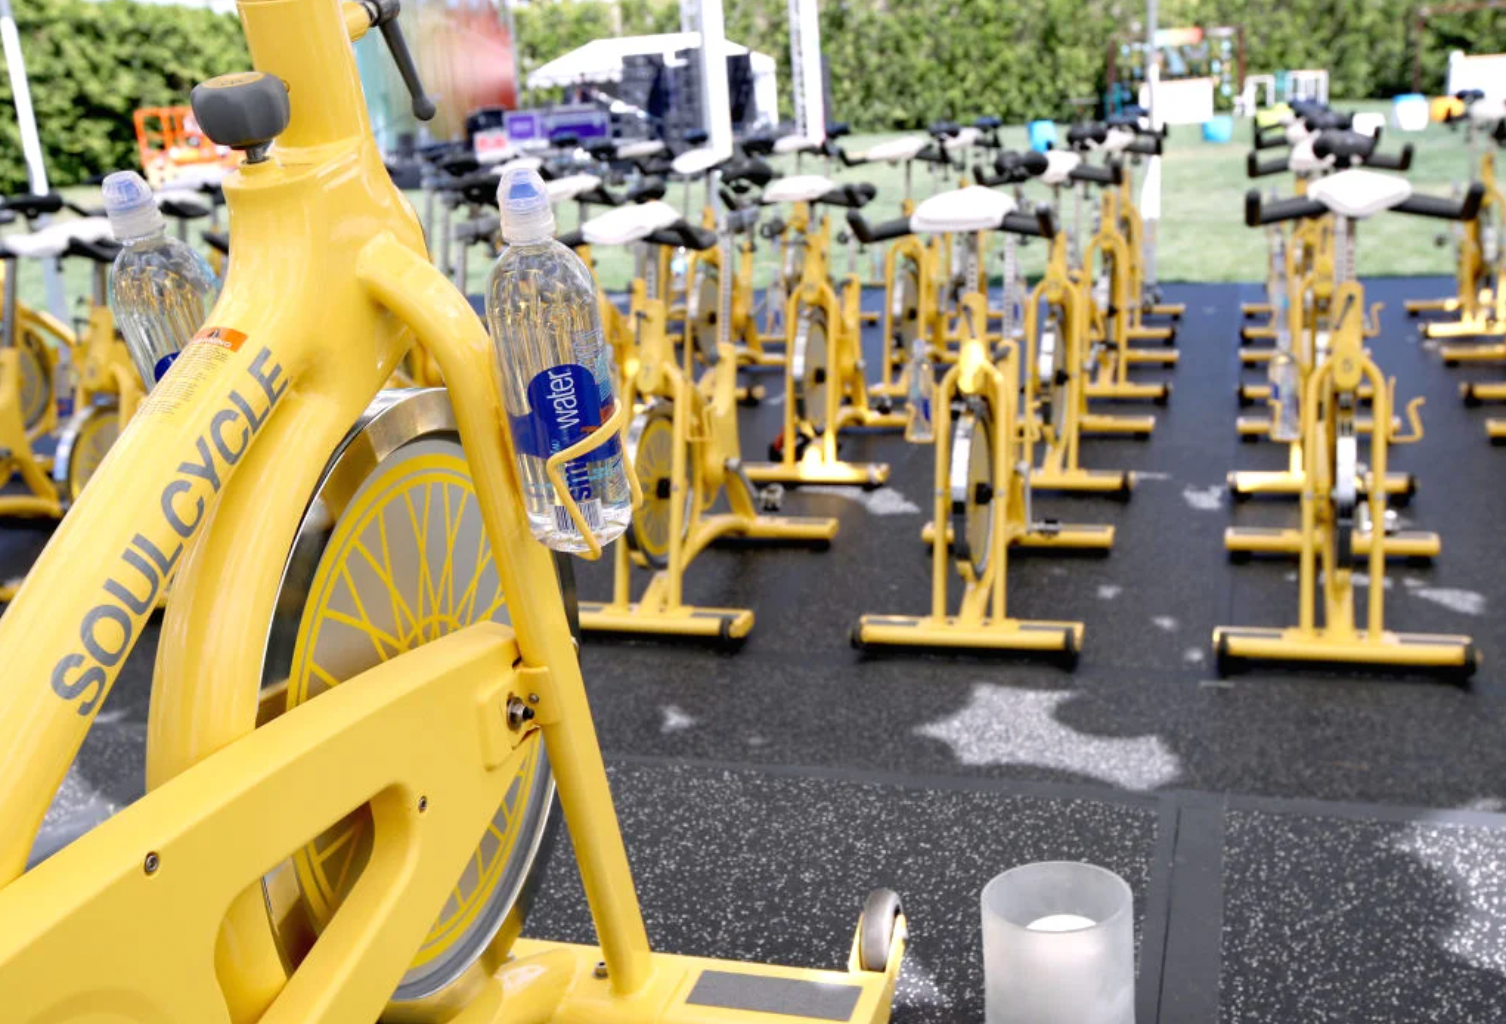 SoulCycle bikes